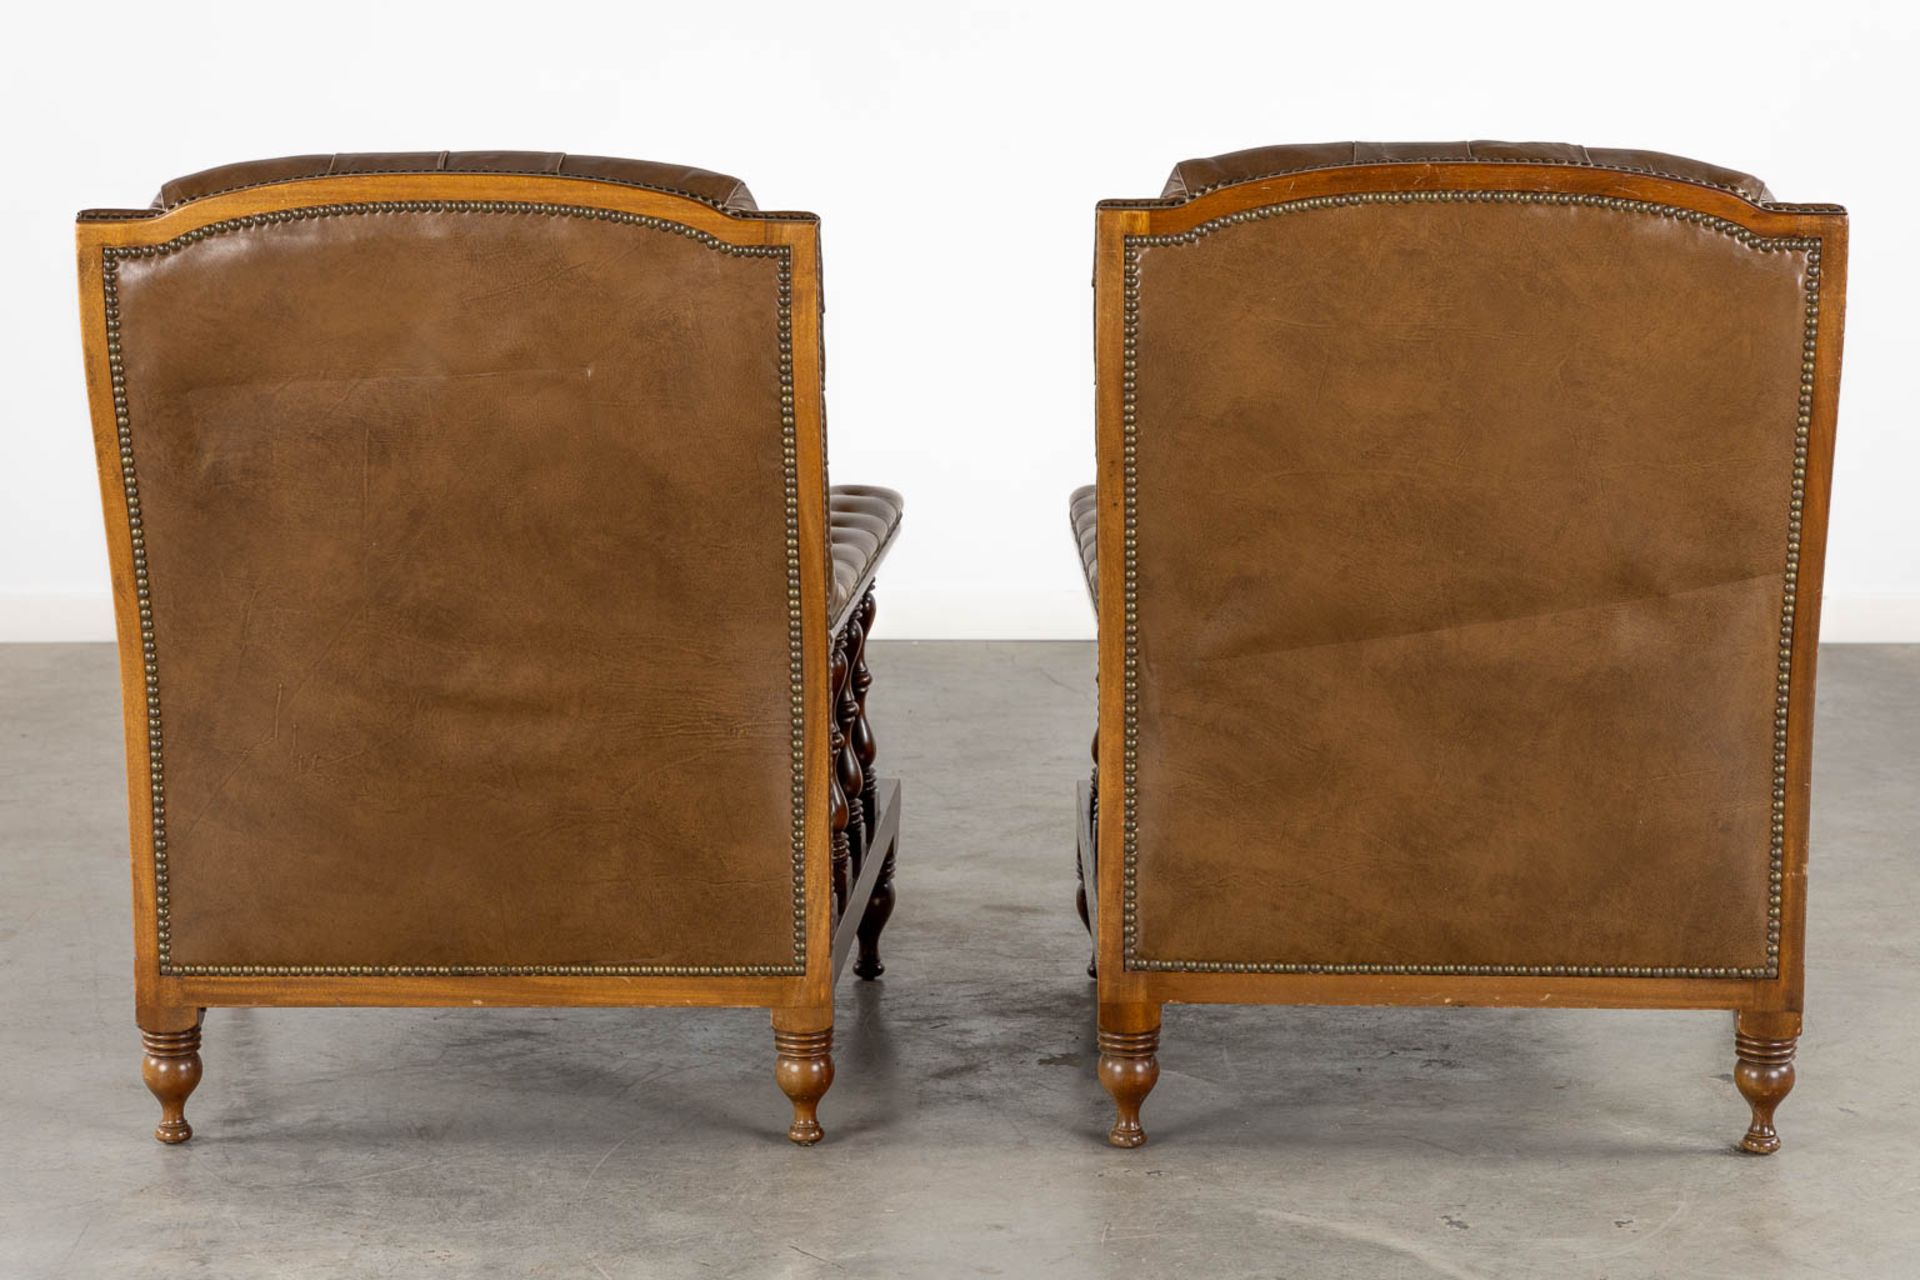 A pair of relax chairs, leather and wood in Chesterfield style. (L:83 x W:74 x H:95 cm) - Bild 5 aus 11